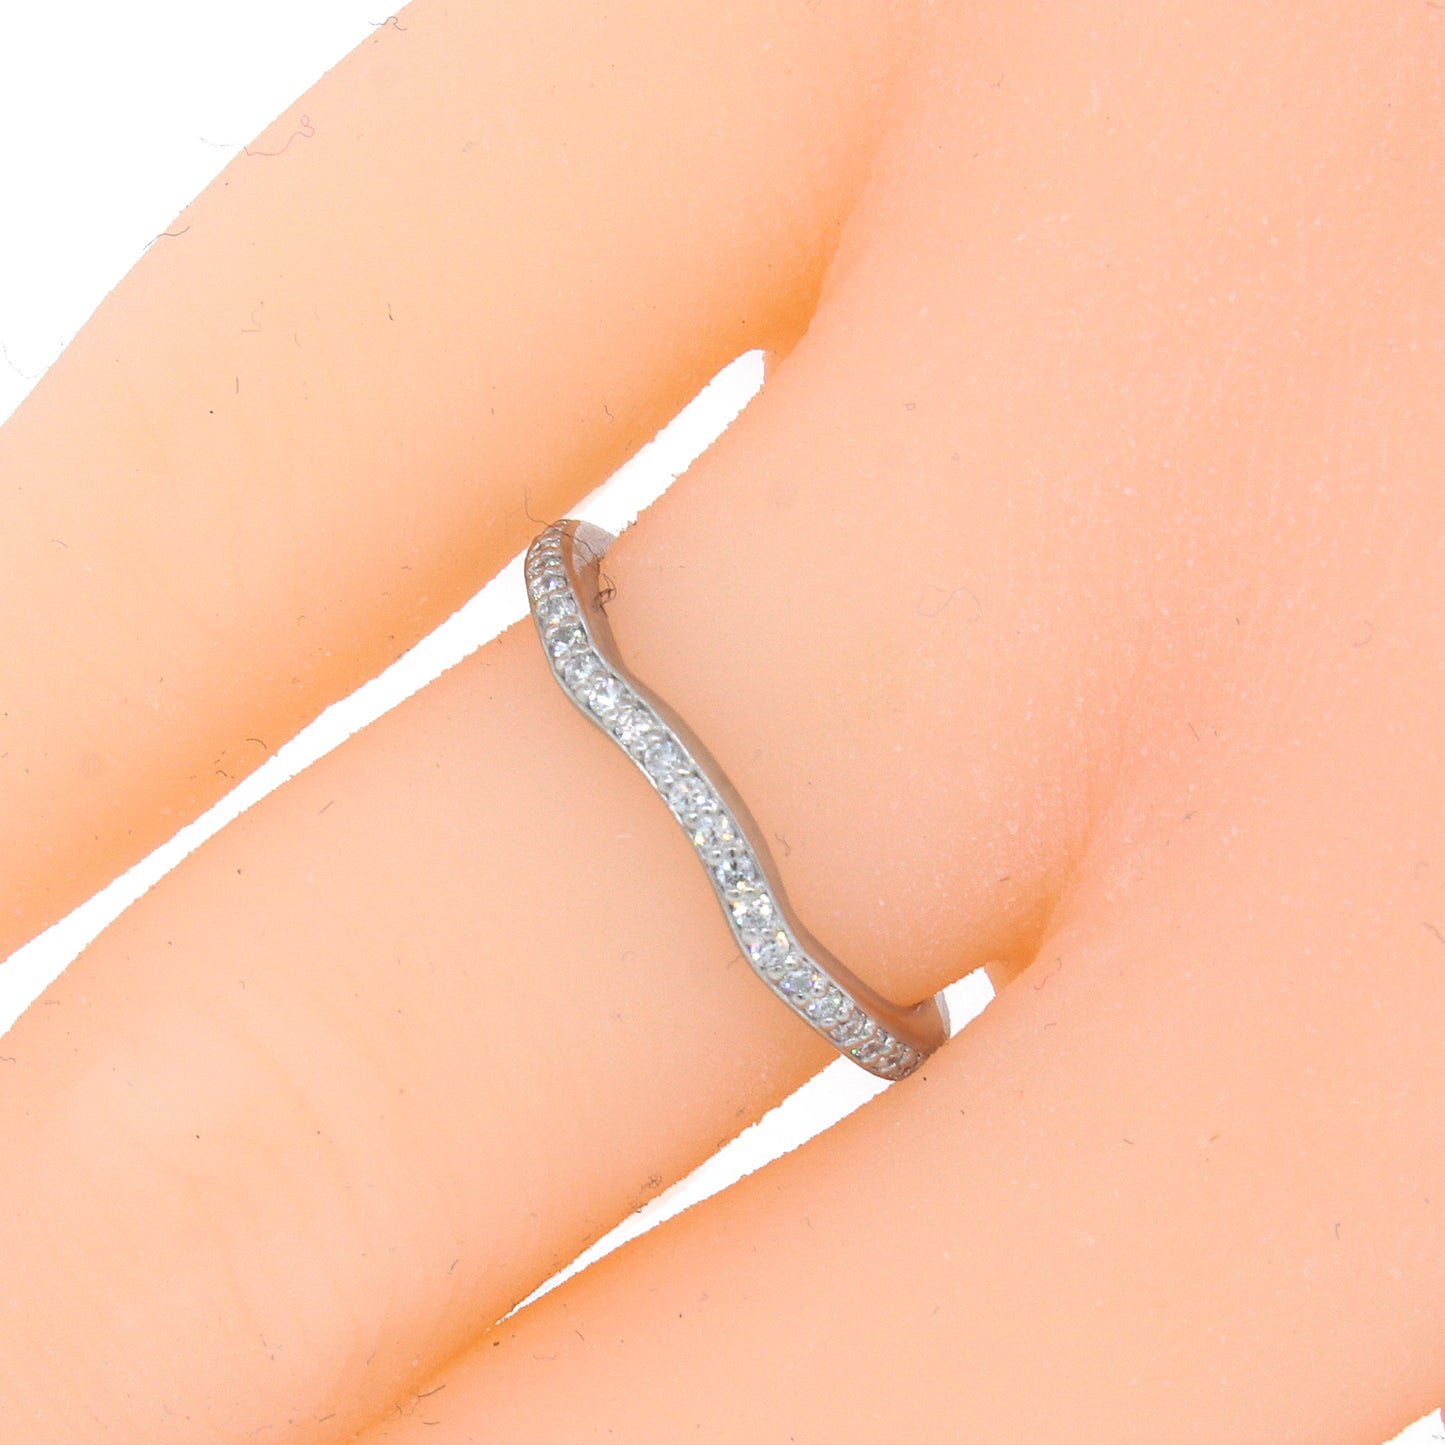 Platinum Pave Curved Diamond Band Ring Size 5.25